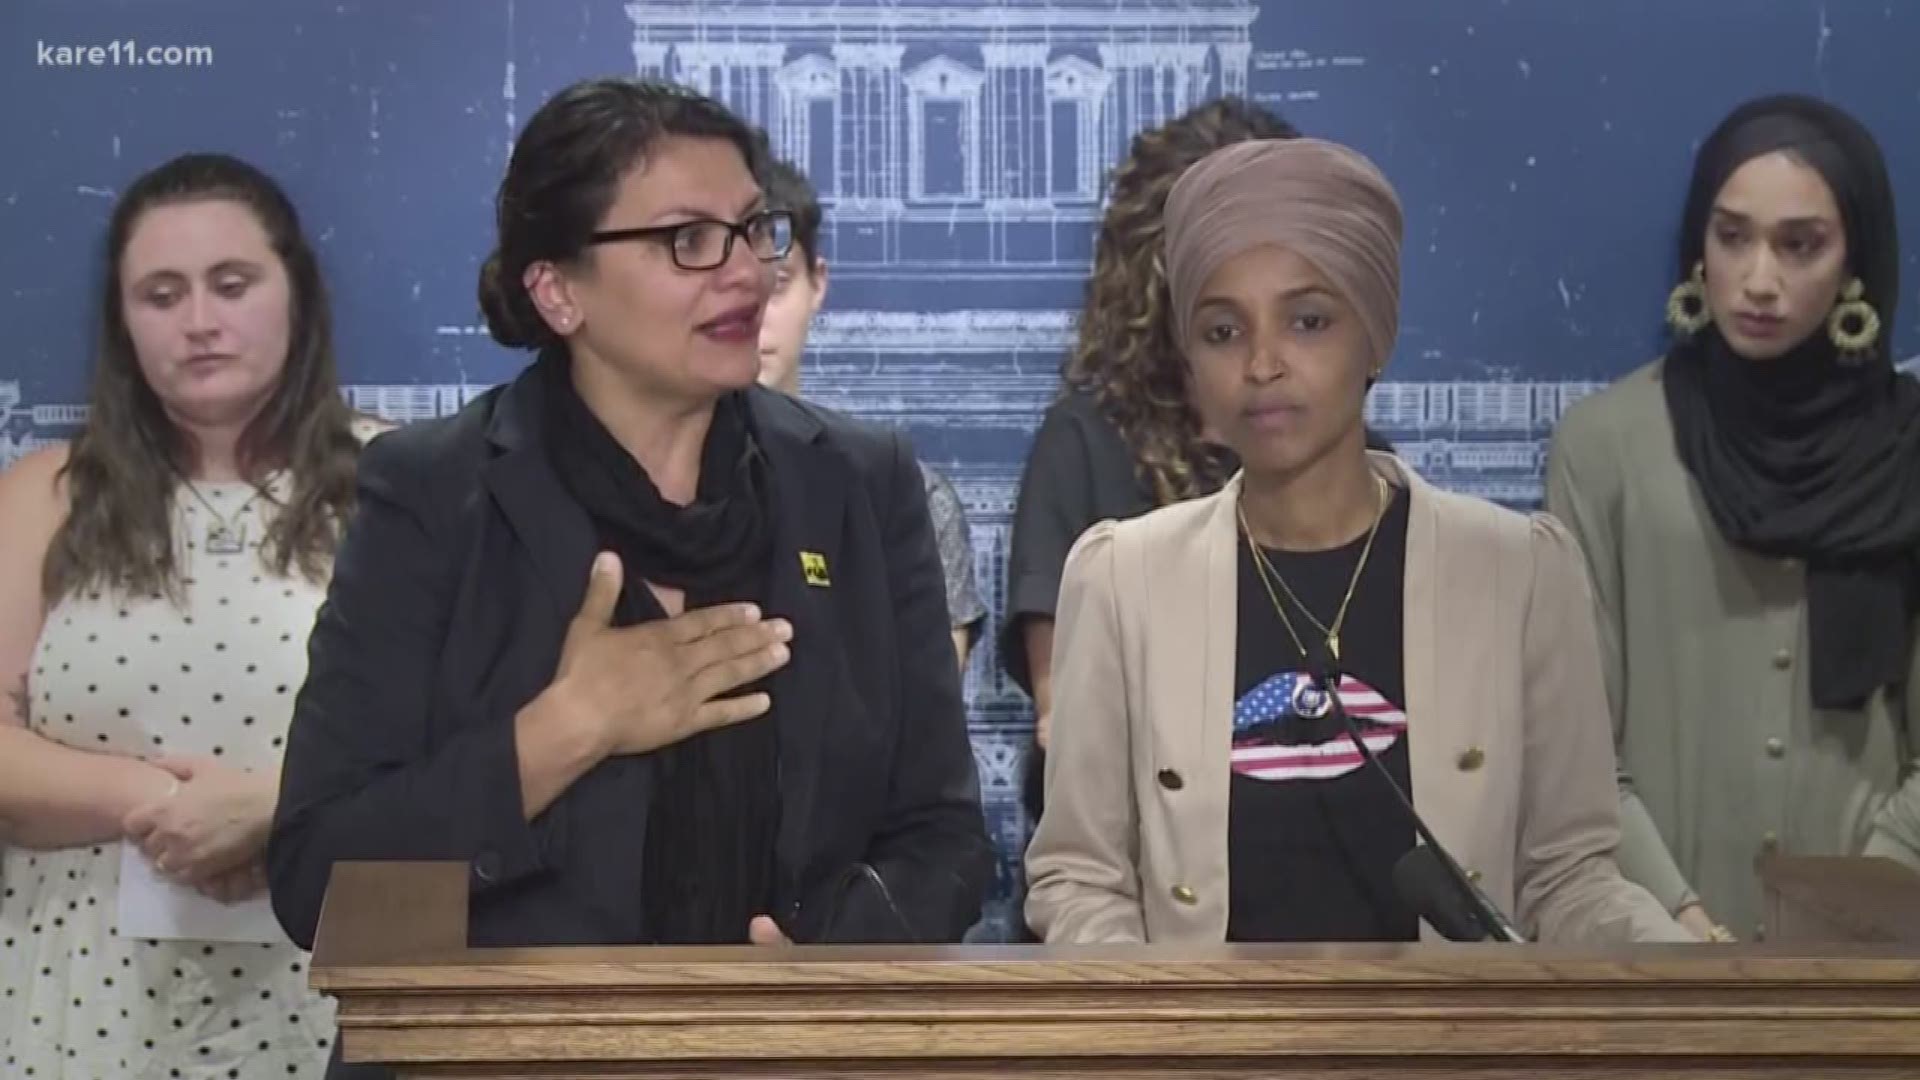 At a crowded news conference at the Minnesota Capitol, the two Muslim American women in Congress -- Rep. Rashida Tlaib and Rep. Ilhan Omar -- spoke out about being barred from traveling to Israel and the Palestinian territories. They also brought in constituents who've been affected by travel restrictions in that part of the world.